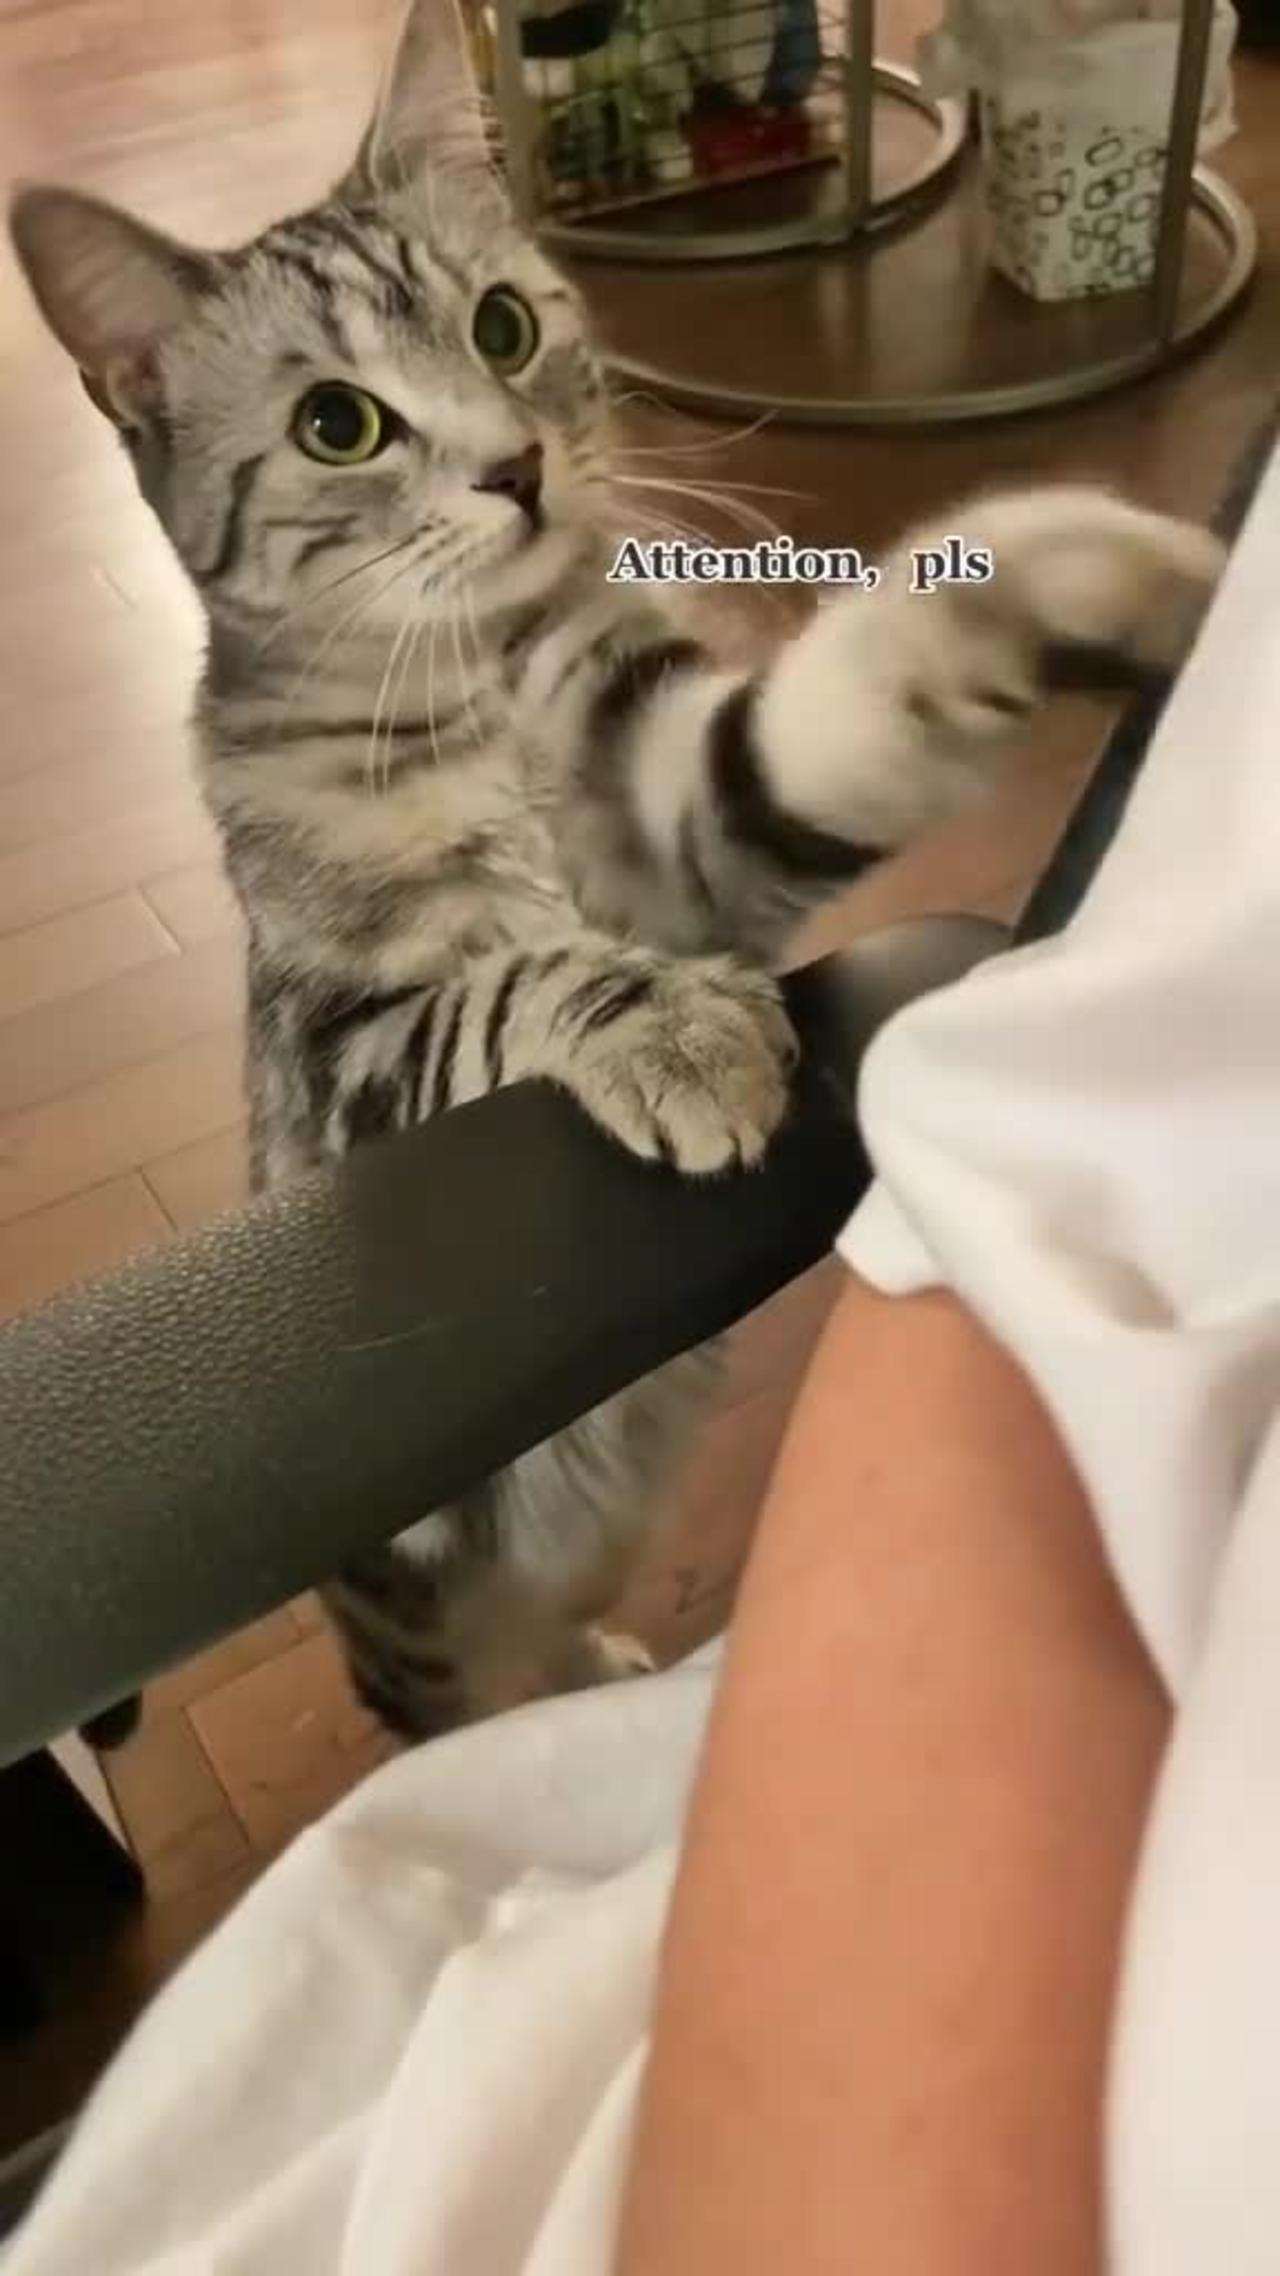 kitty wants attention